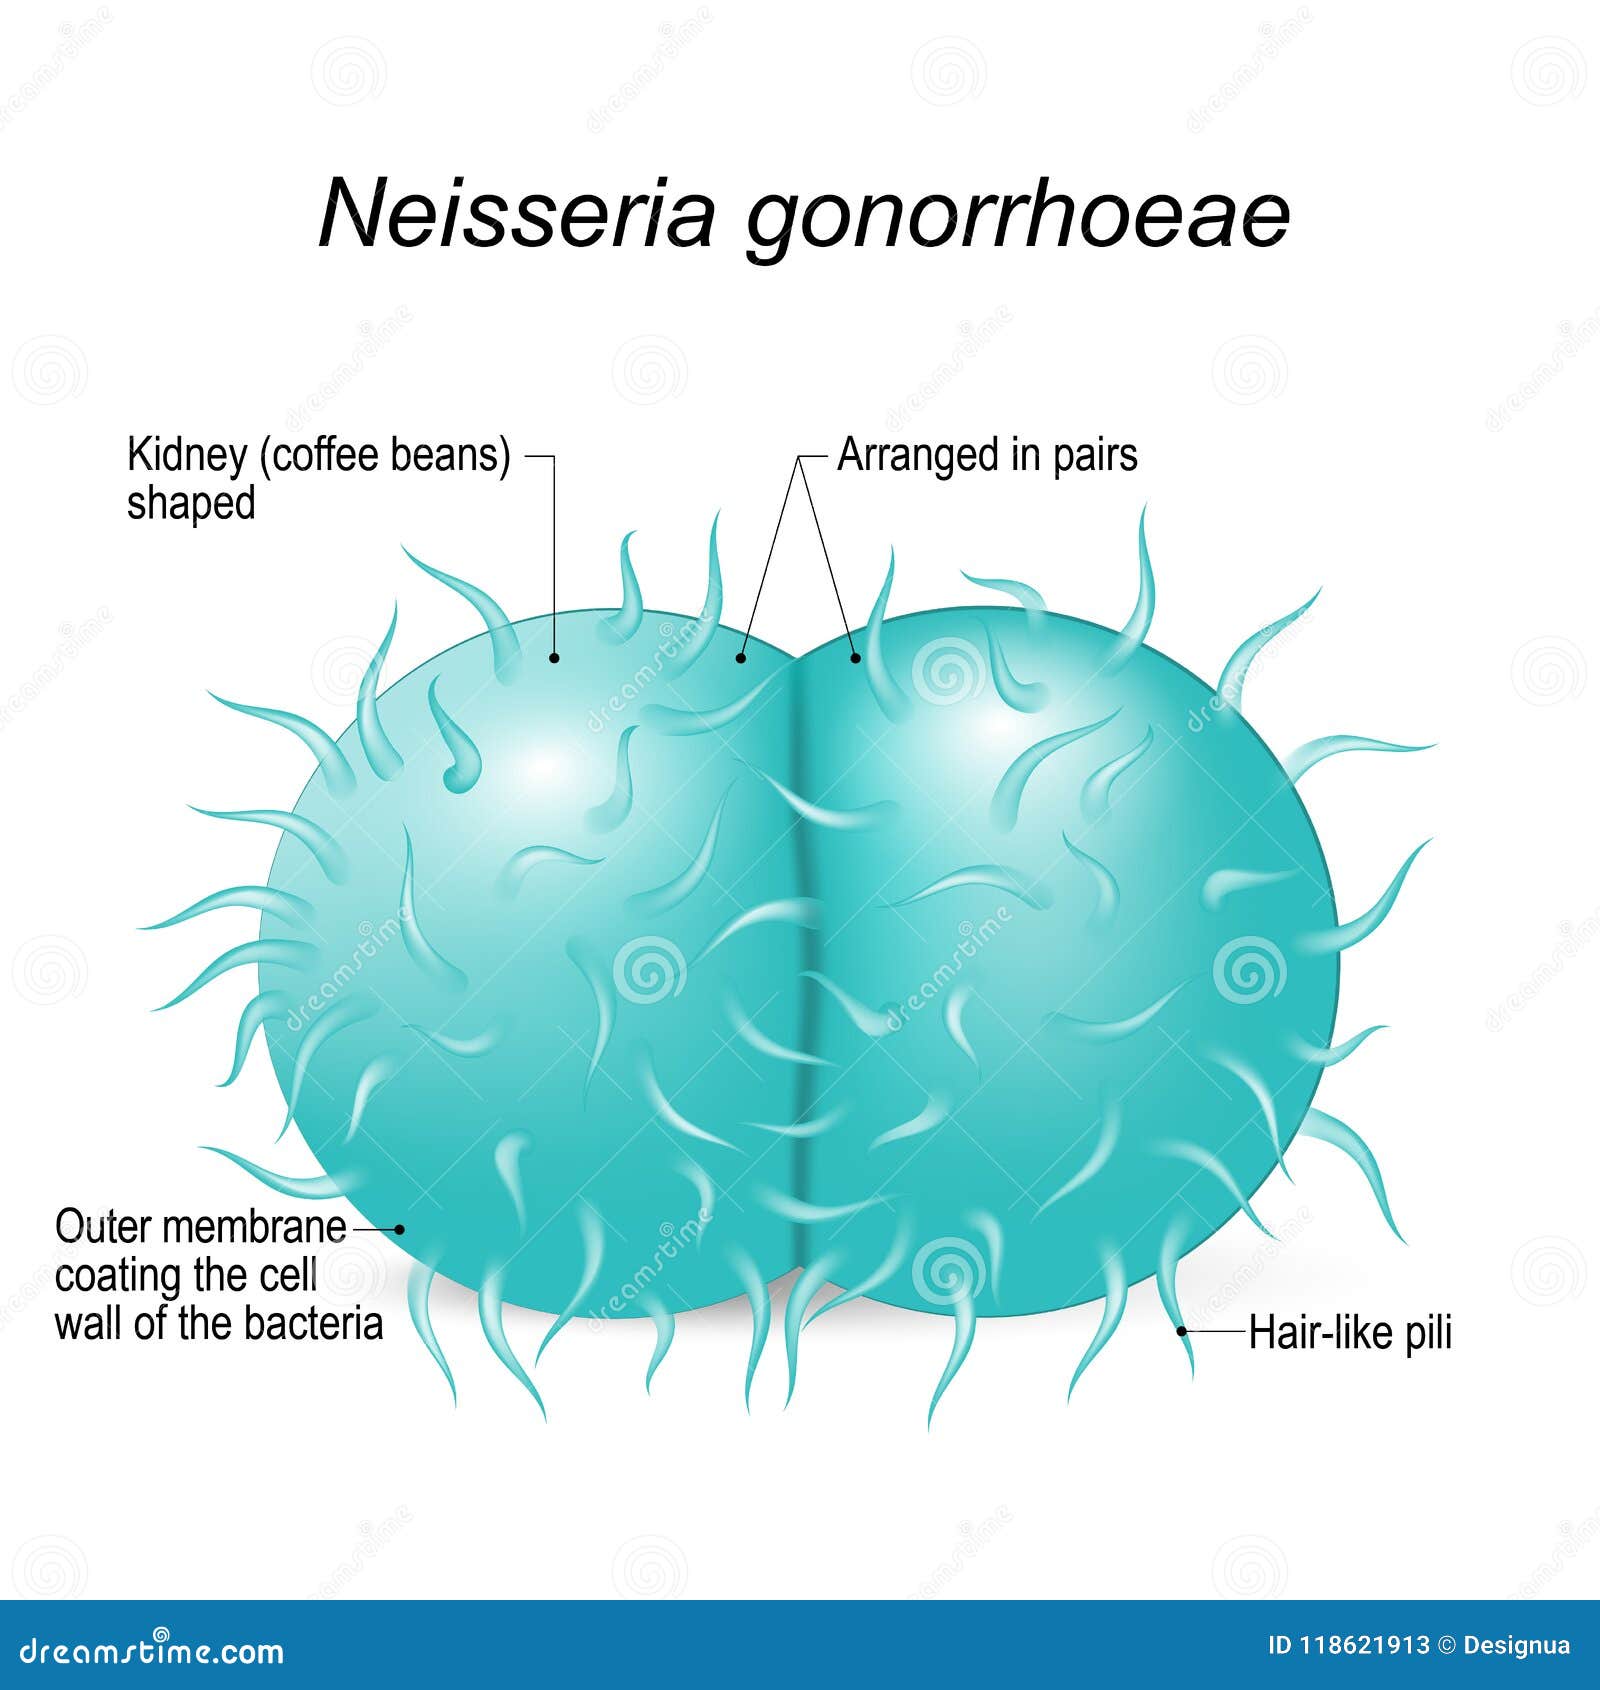 neisseria gonorrhoeae. structure of a bacterial cell